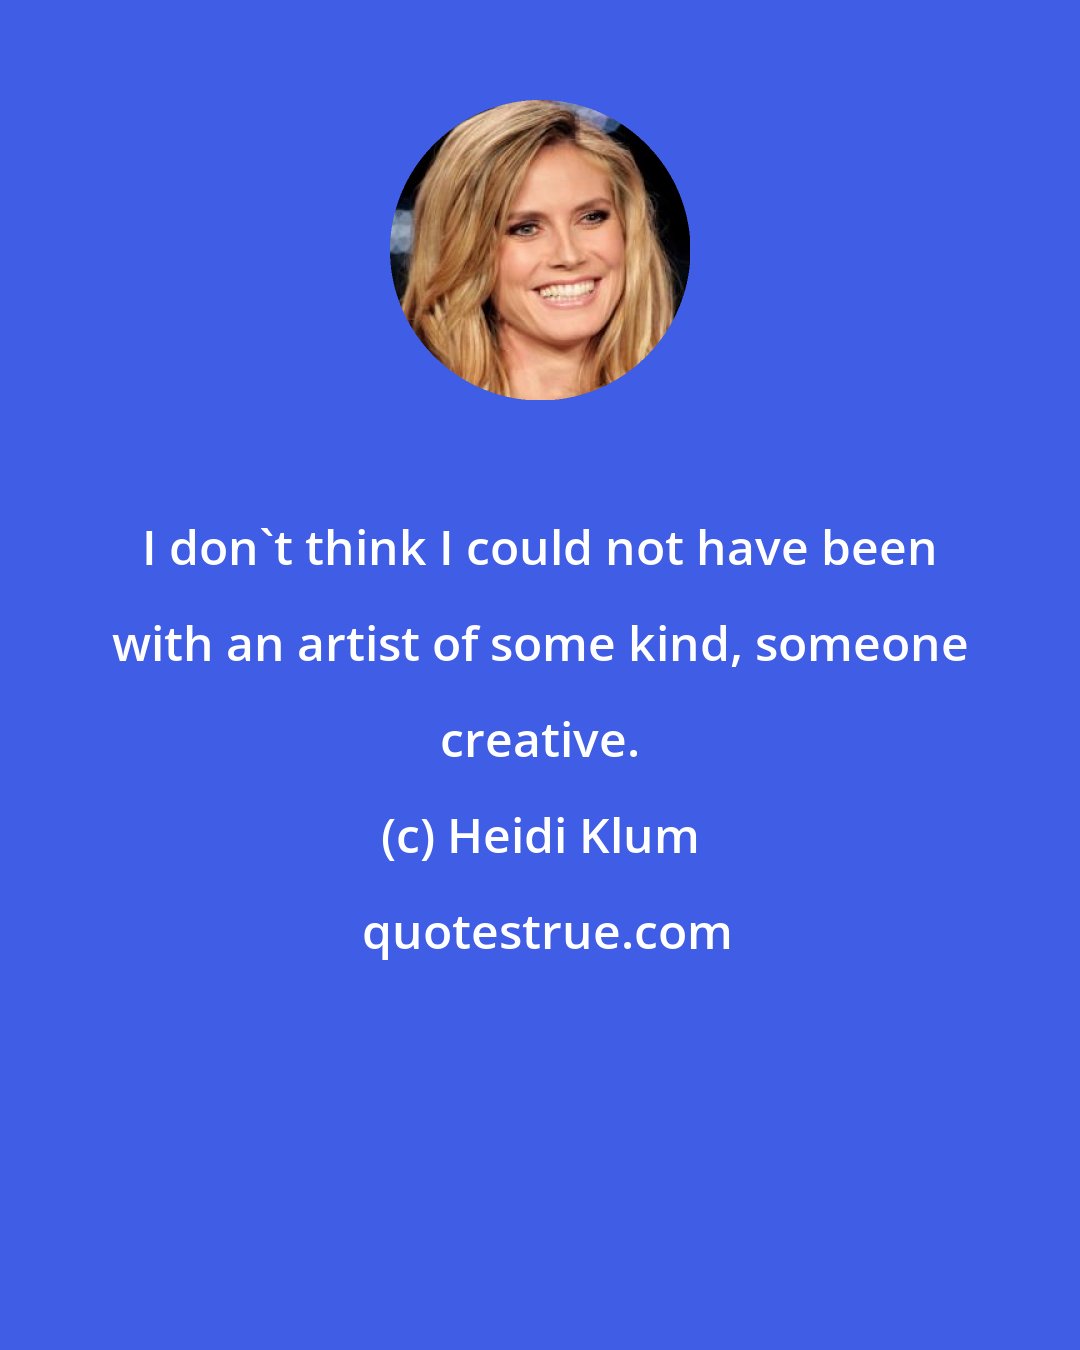 Heidi Klum: I don't think I could not have been with an artist of some kind, someone creative.